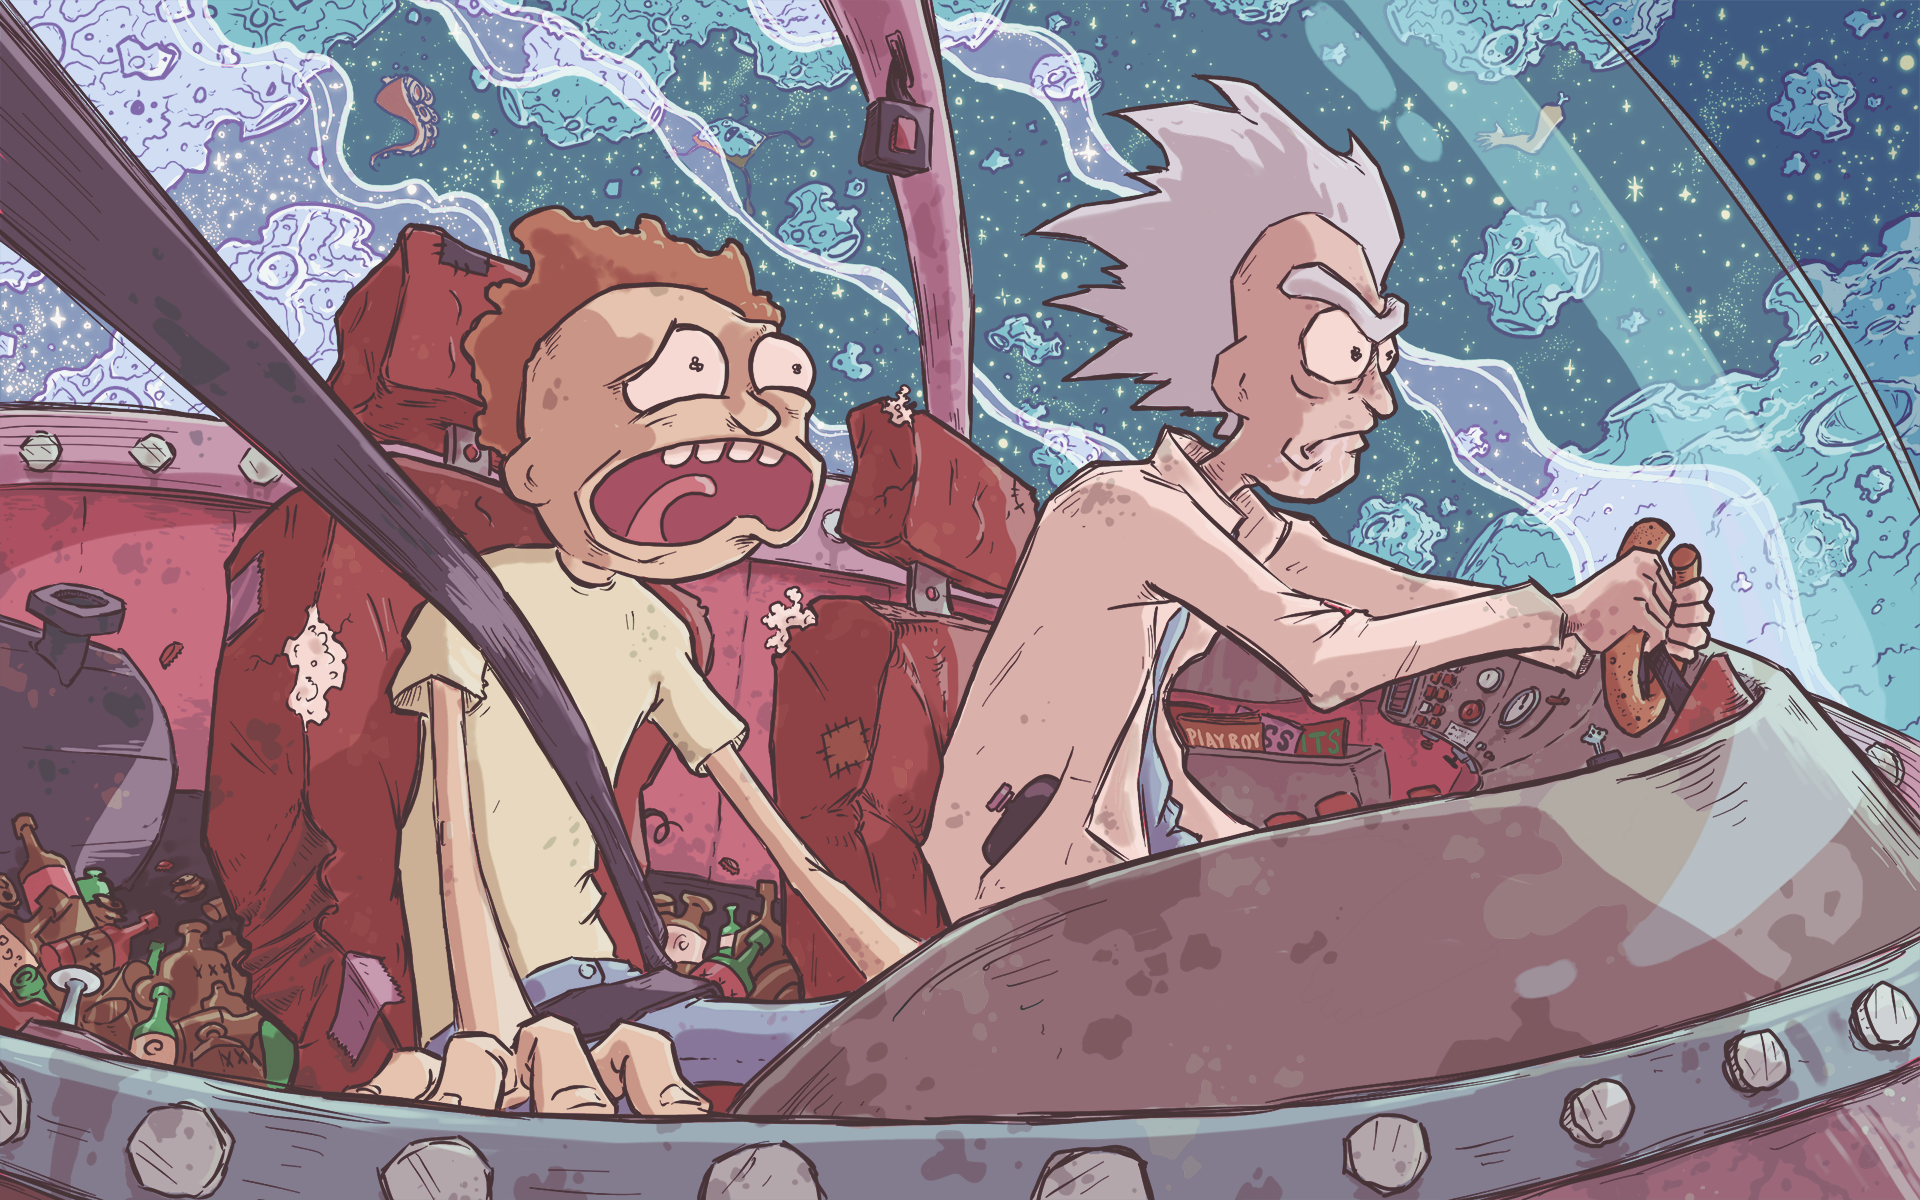 fan_art_friday___rick_and_morty_by_ghotire-d90puf1.png